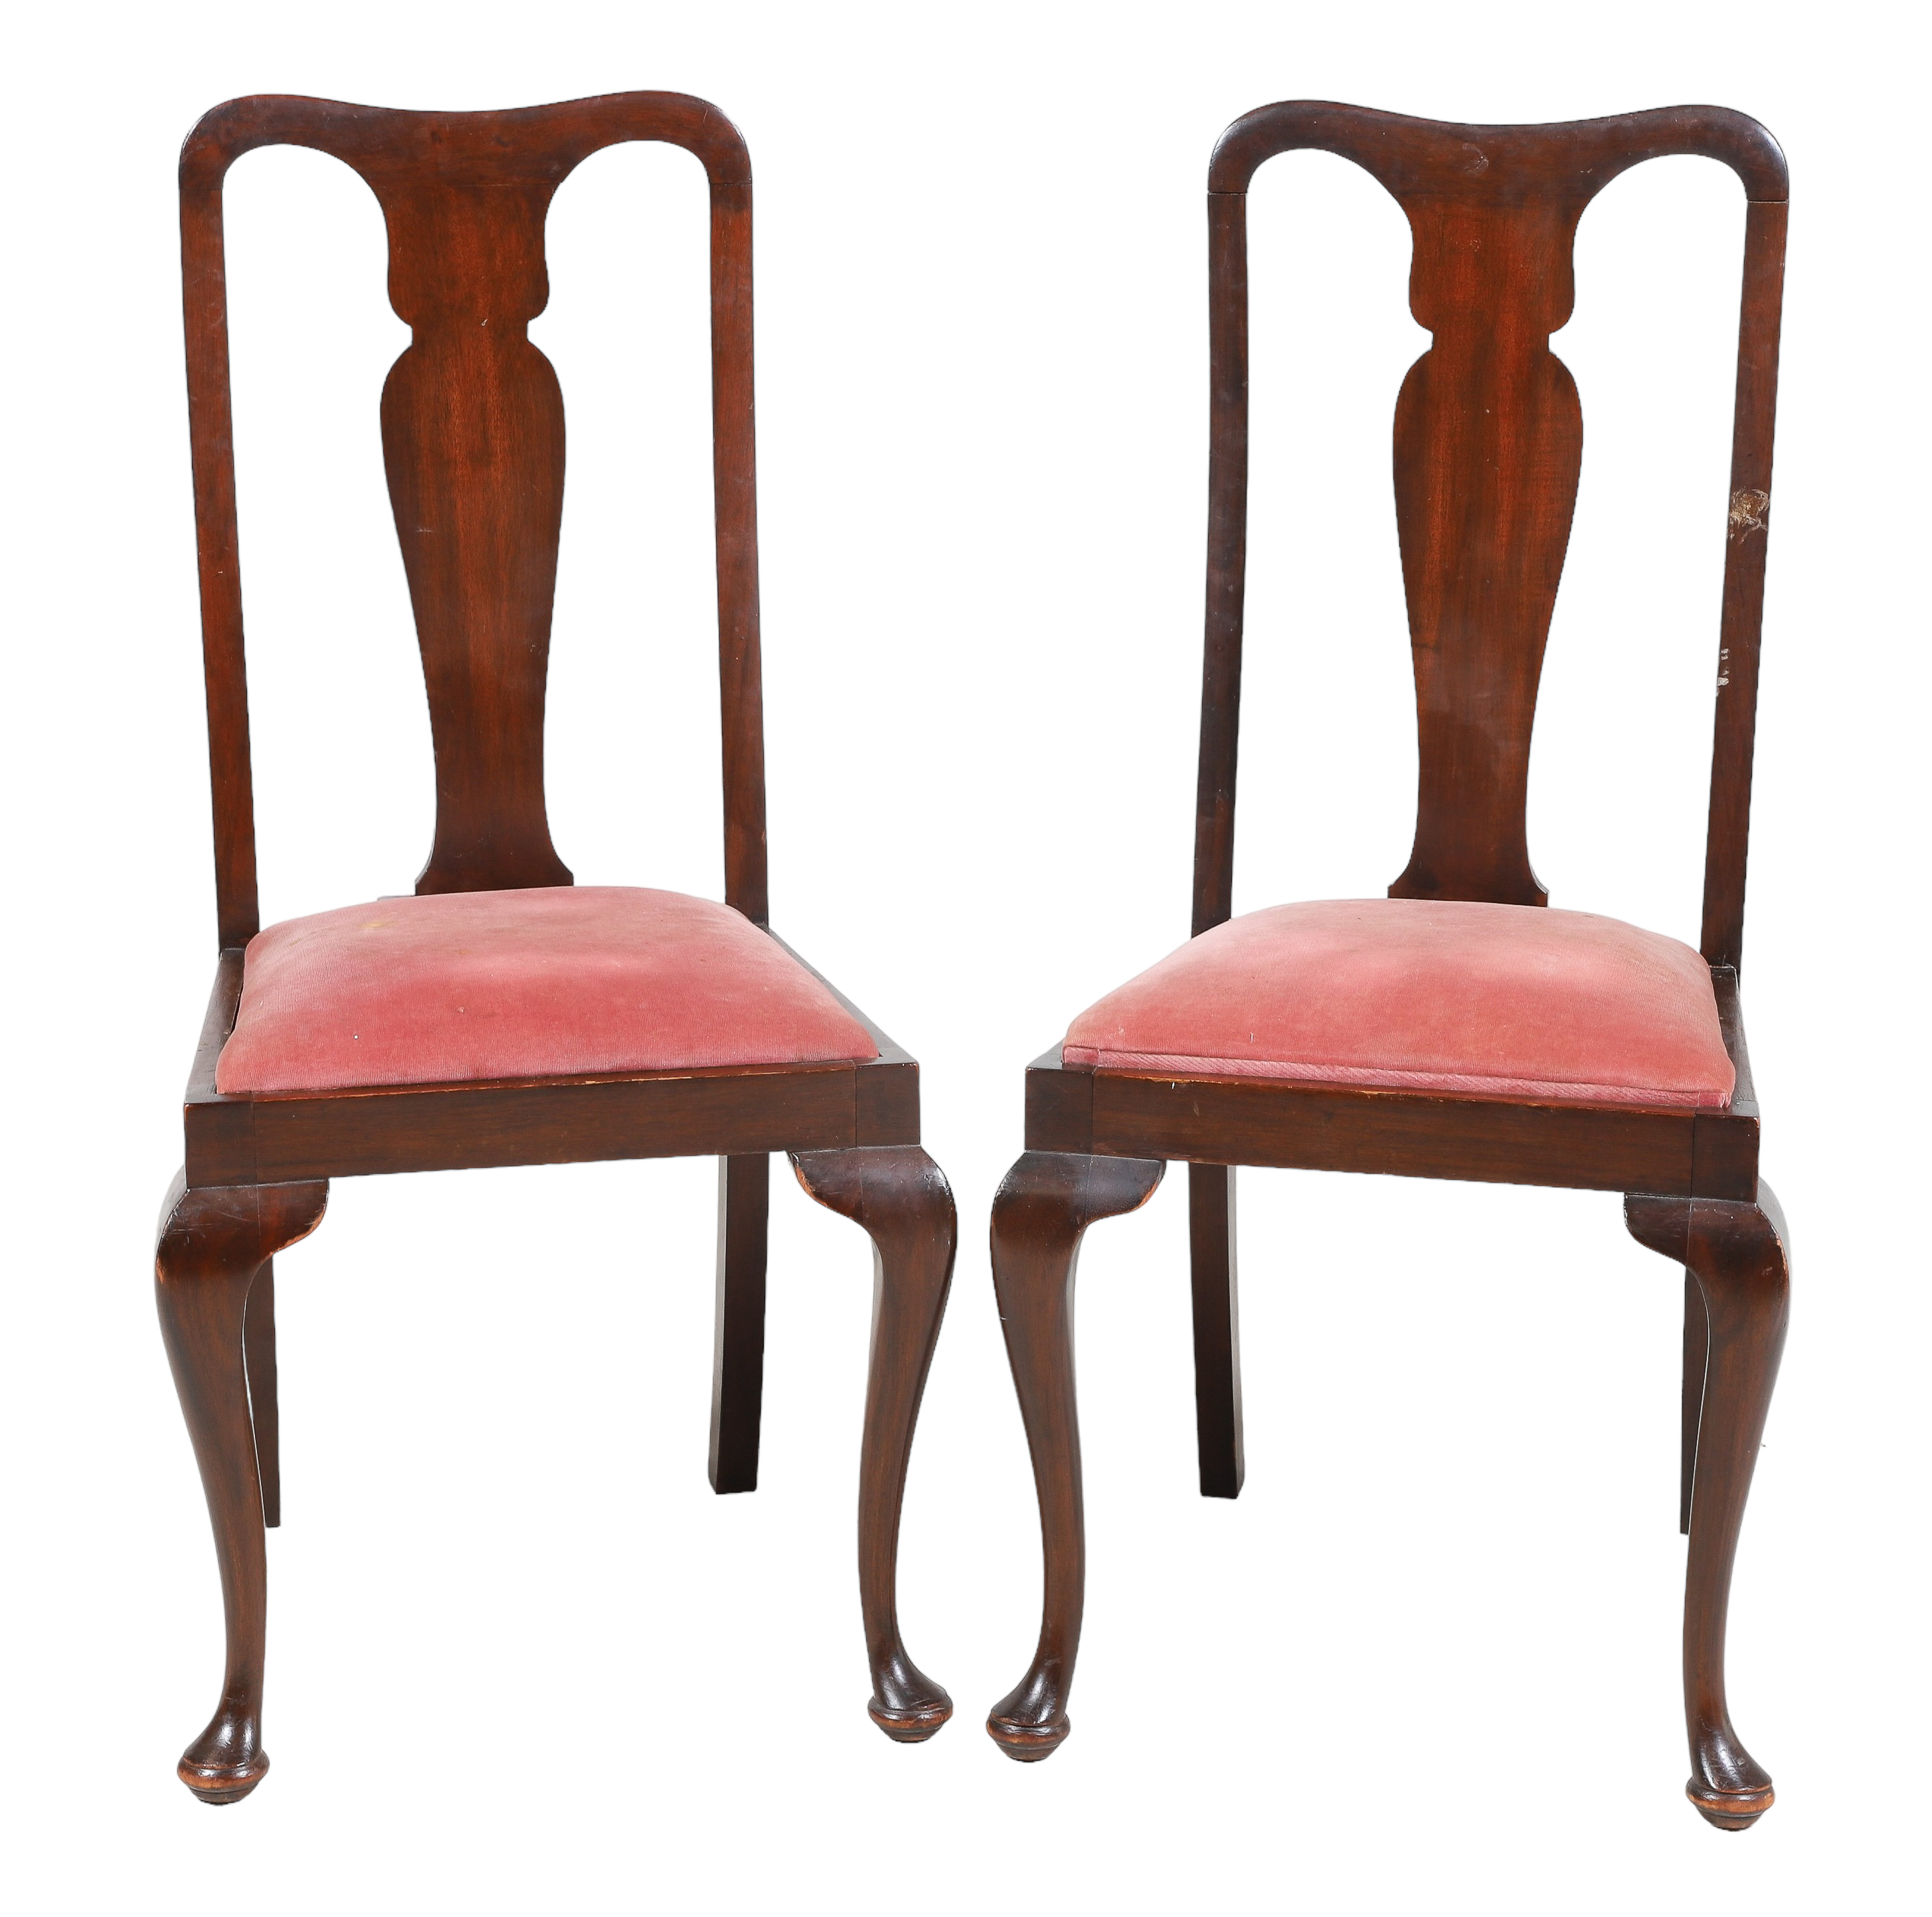 (2) Queen Anne style carved mahogany